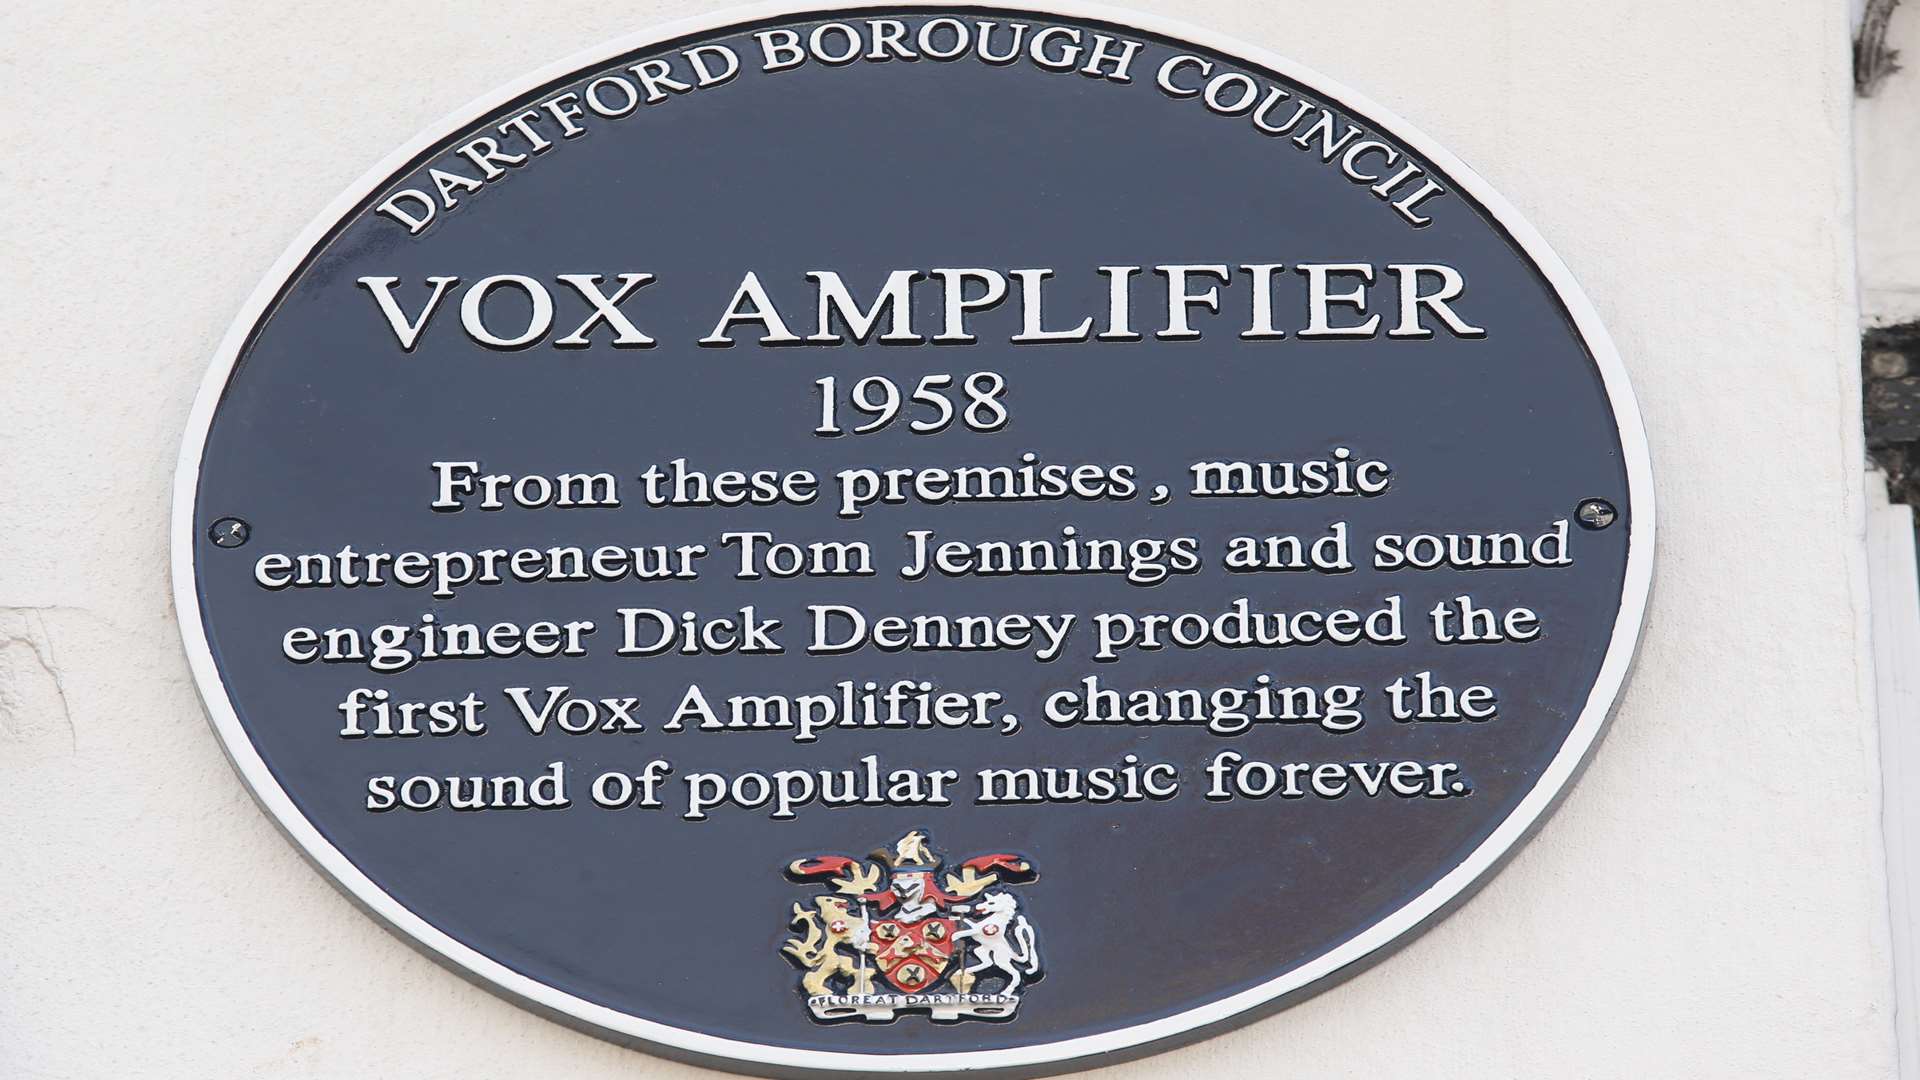 The plaque has been mounted on the wall of 119 Dartford Road